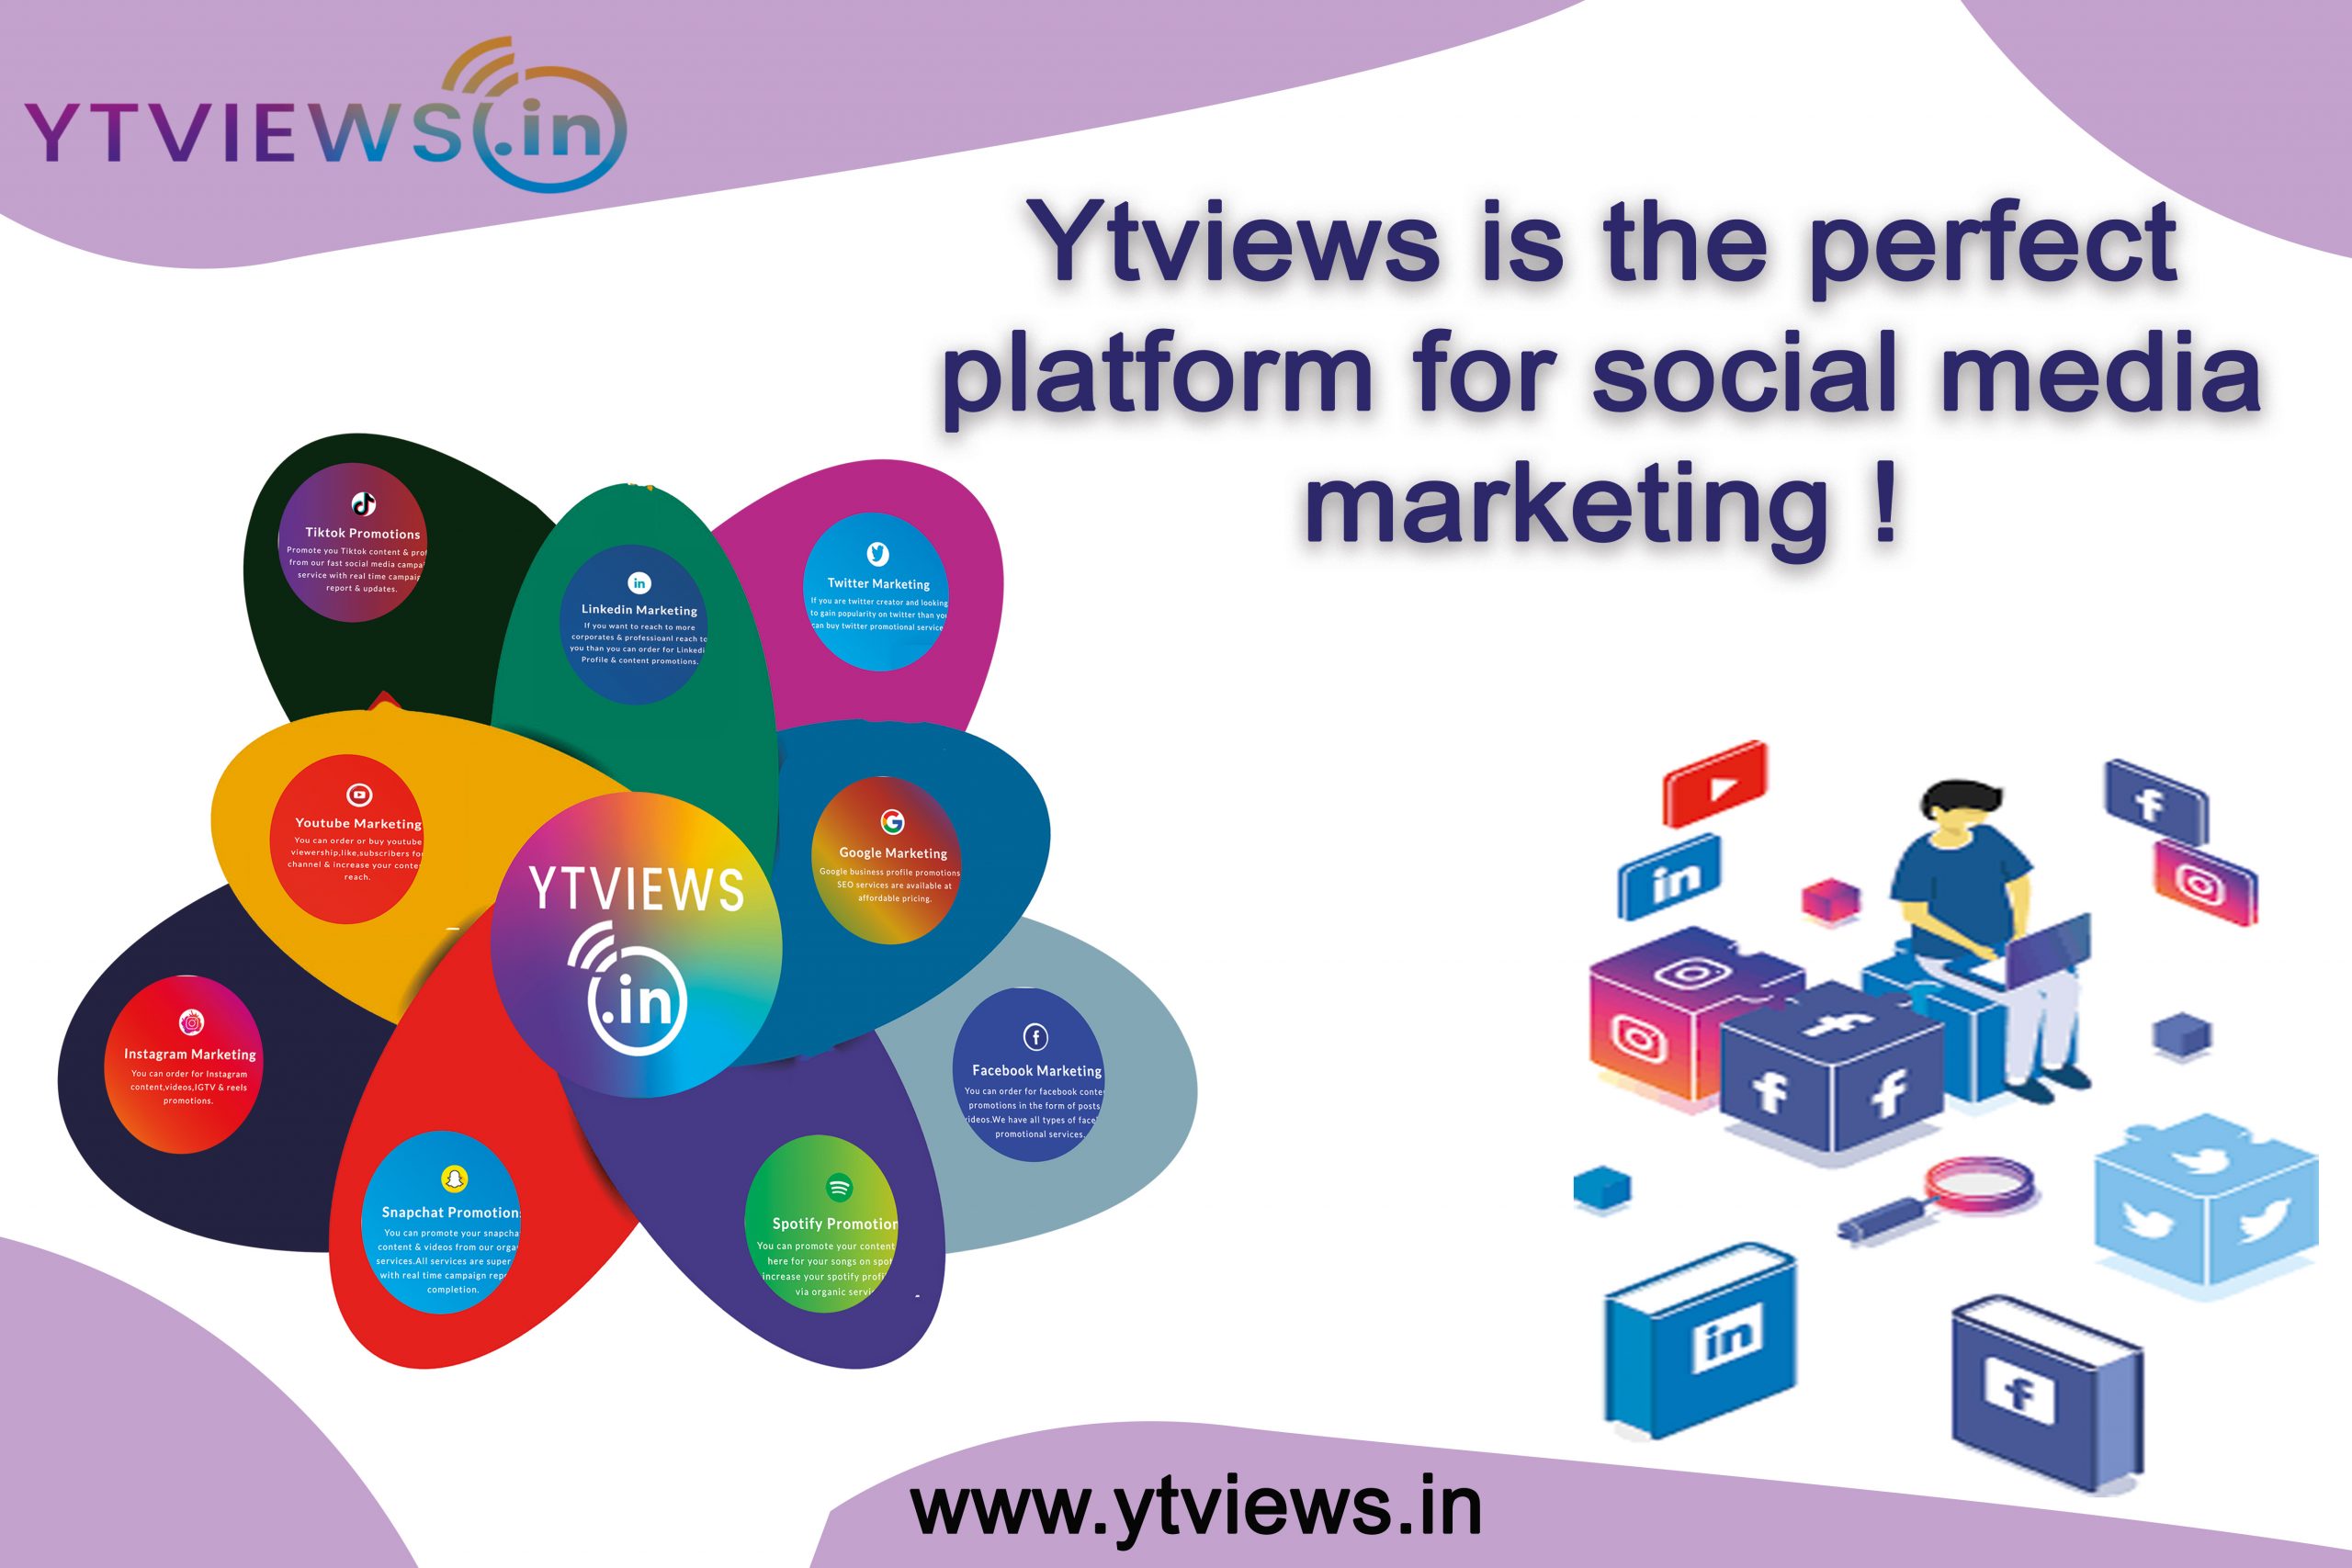 Ytviews is the perfect platform for social media marketing